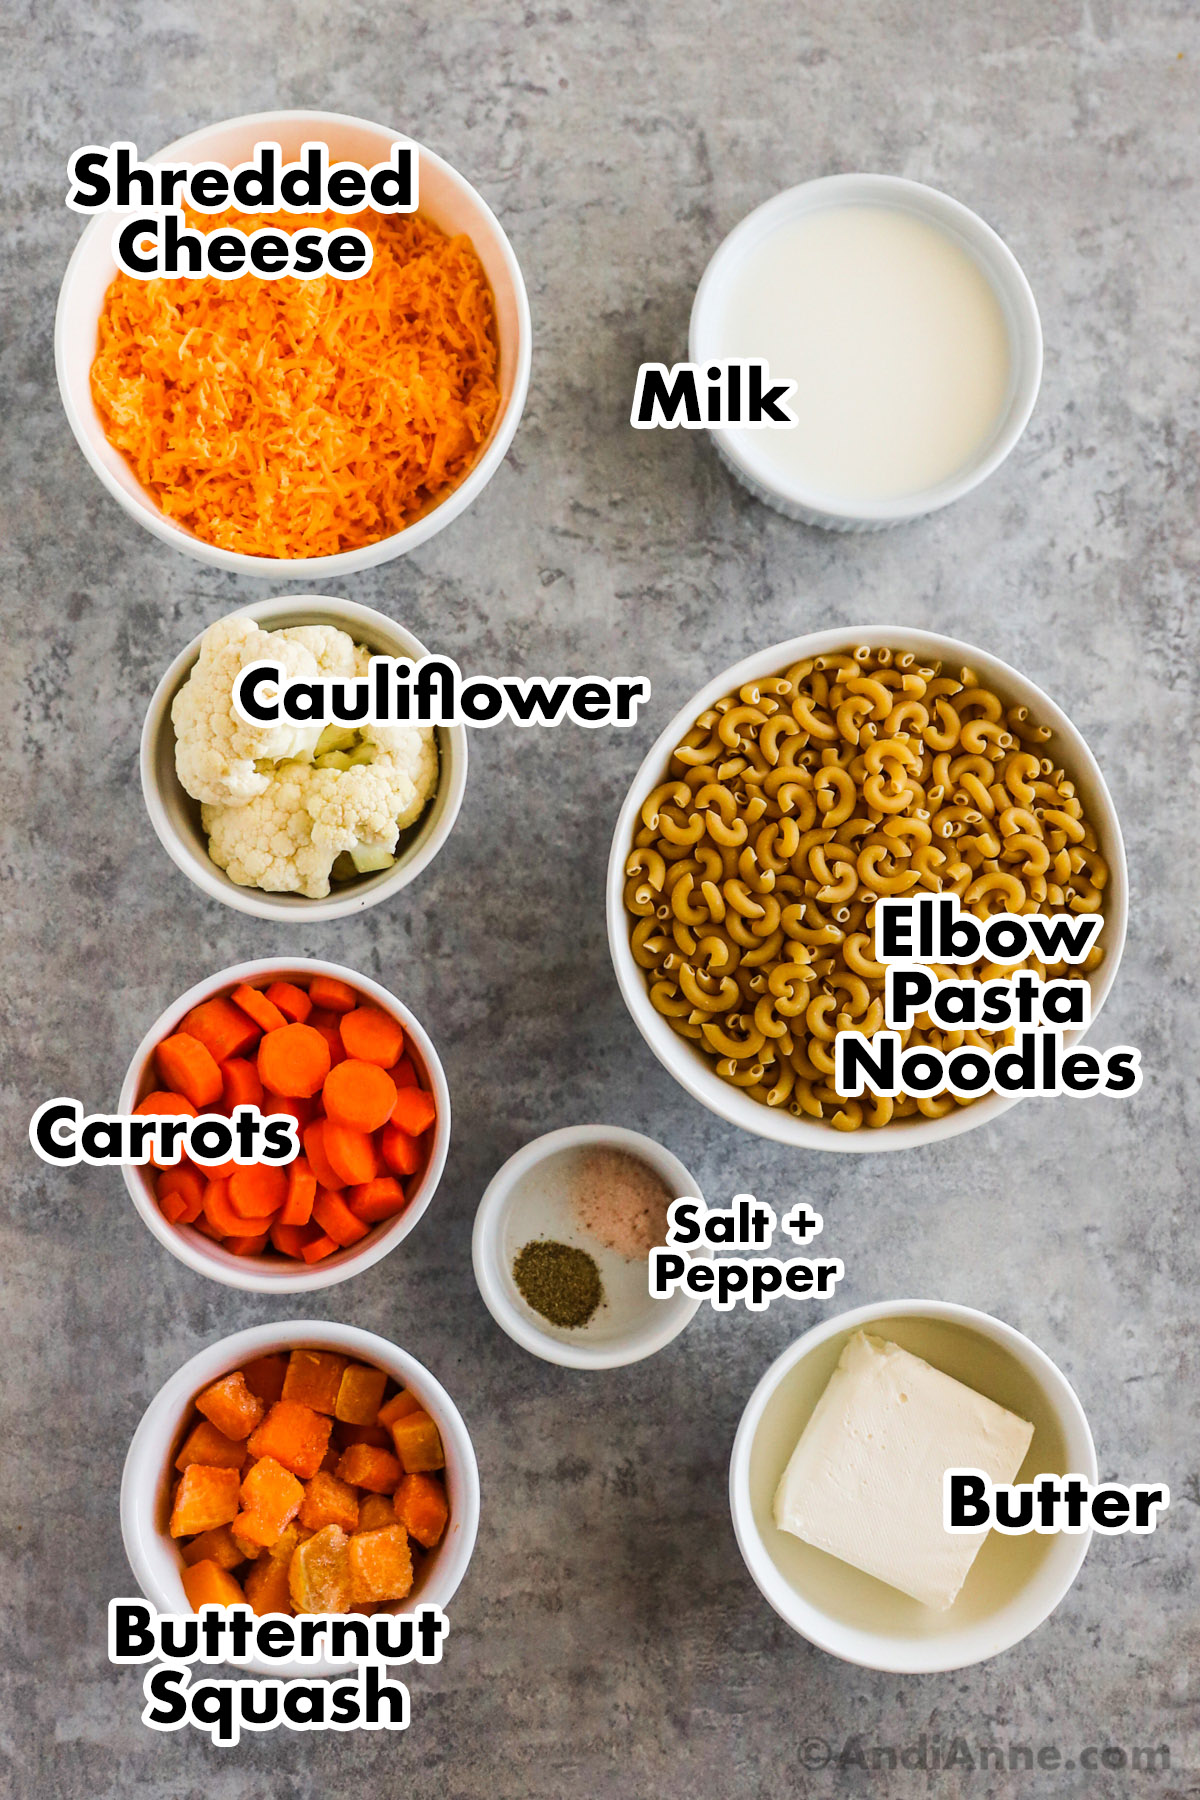 Recipe ingredients including bowls of shredded cheese, milk, cauliflower, pasta, carrots, squash, butter, salt and pepper